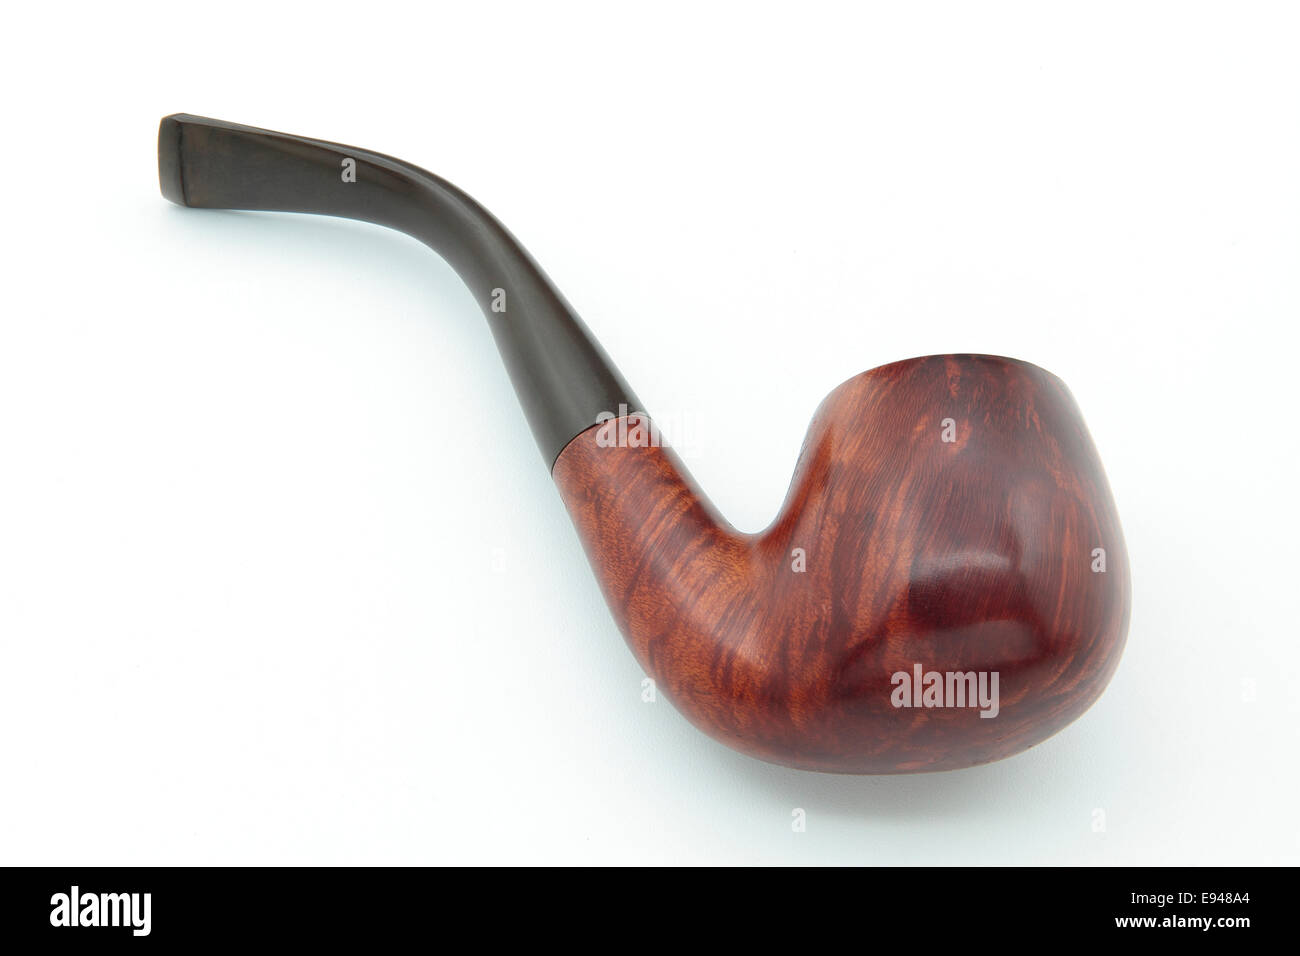 wooden smoking pipe isolated on white background Stock Photo